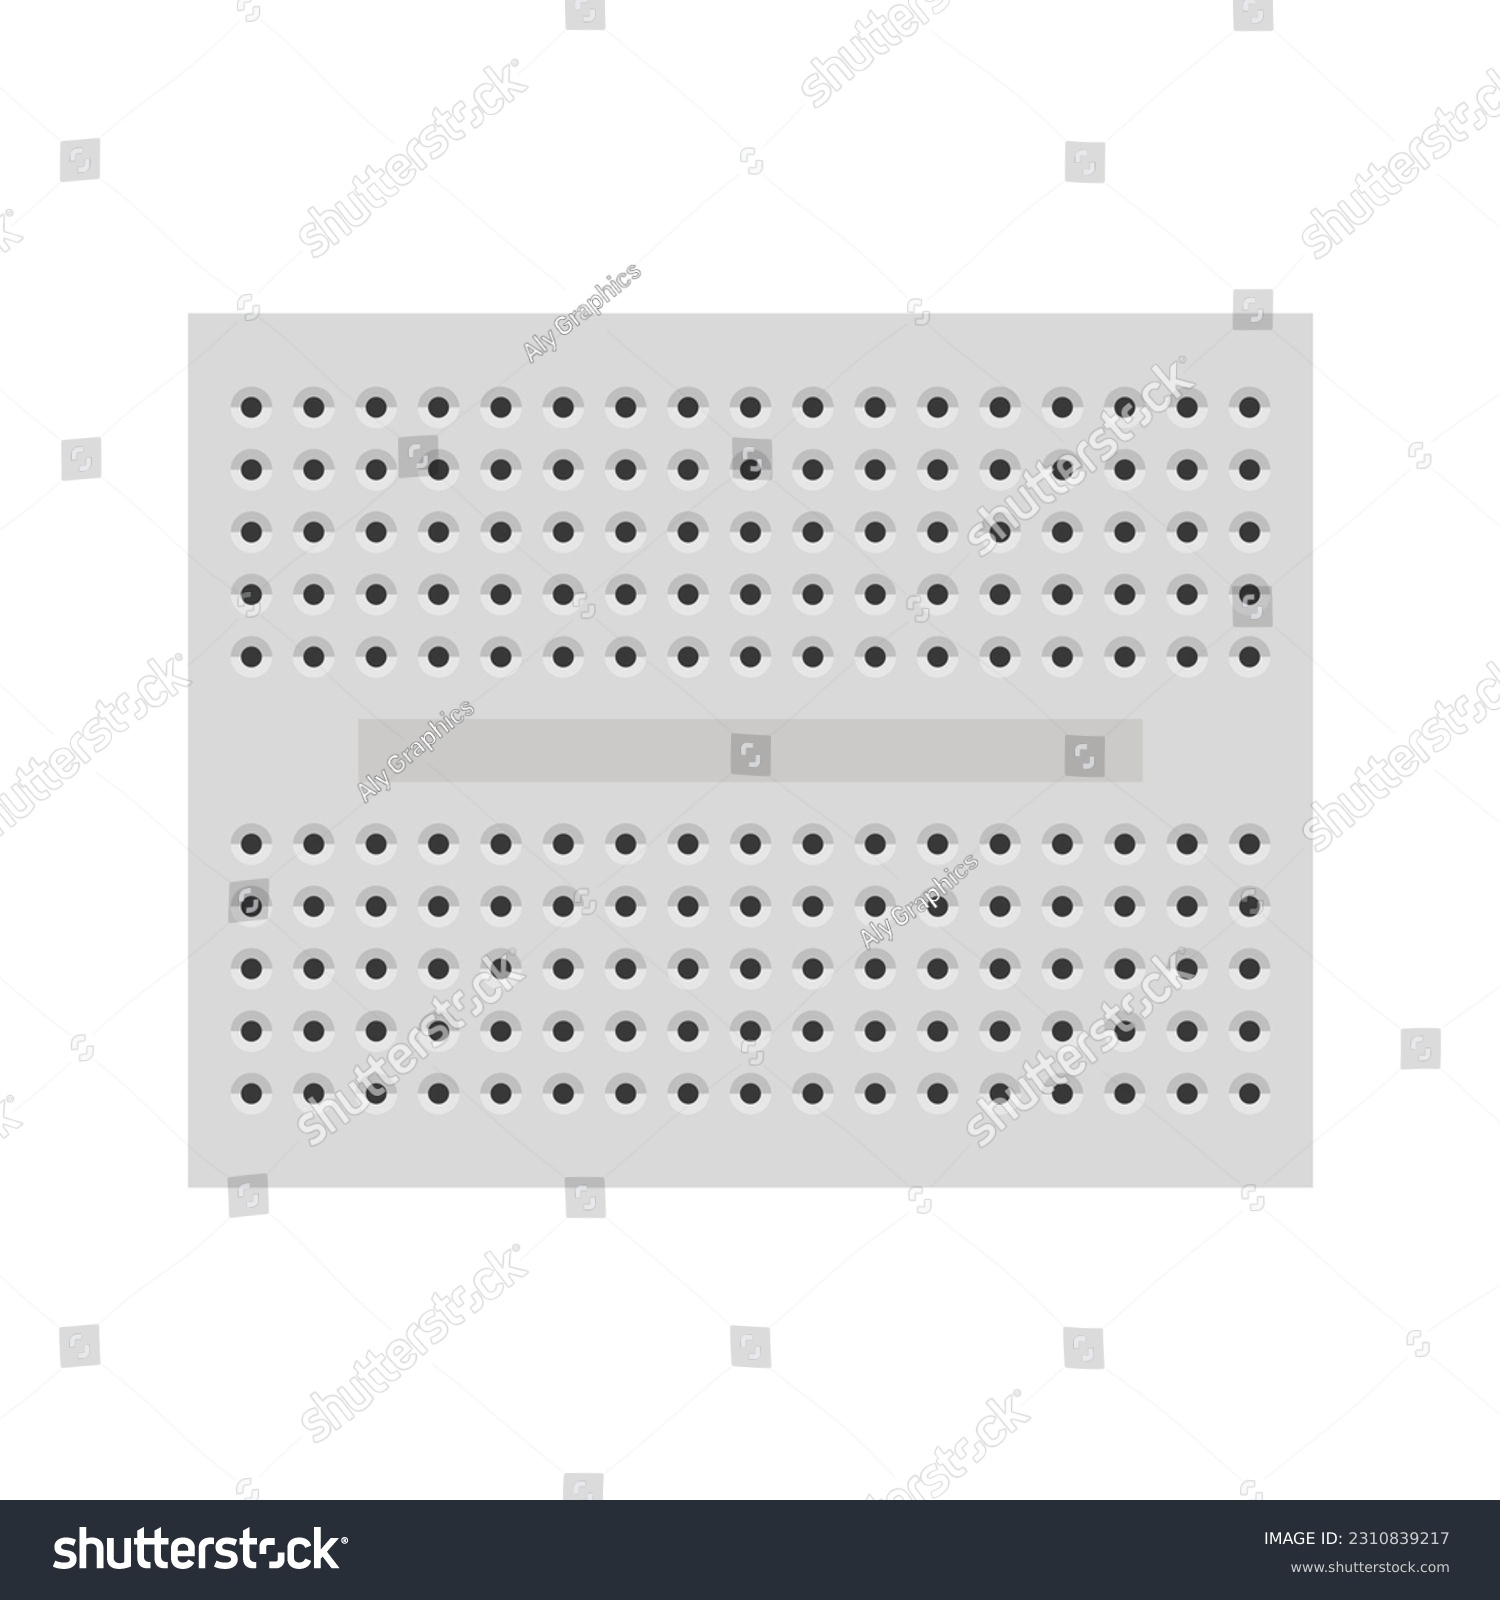 SVG of Mini Breadboard Vector Illustration: Showcasing the Compact and Versatile Design of a Miniature Breadboard for Prototyping Electronics in a Striking Visual Representation svg